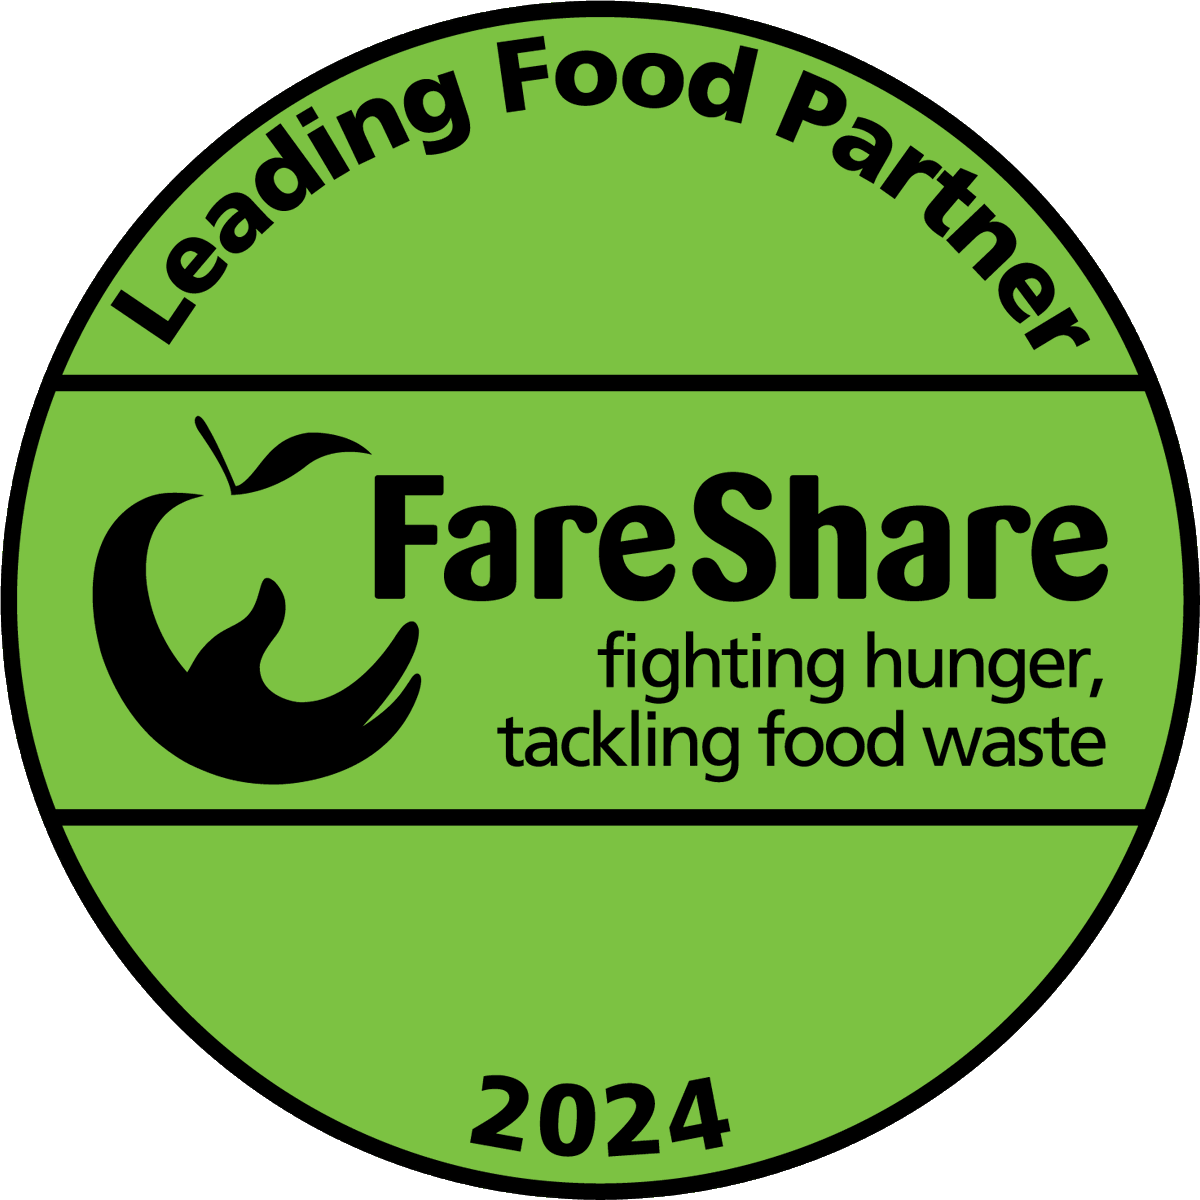 We're delighted to once again be recognised as a Leading Food Partner to FareShare. greencore.com/fareshare-lead… #StartsWithFood #MakingEveryDayTasteBetter @FareShare